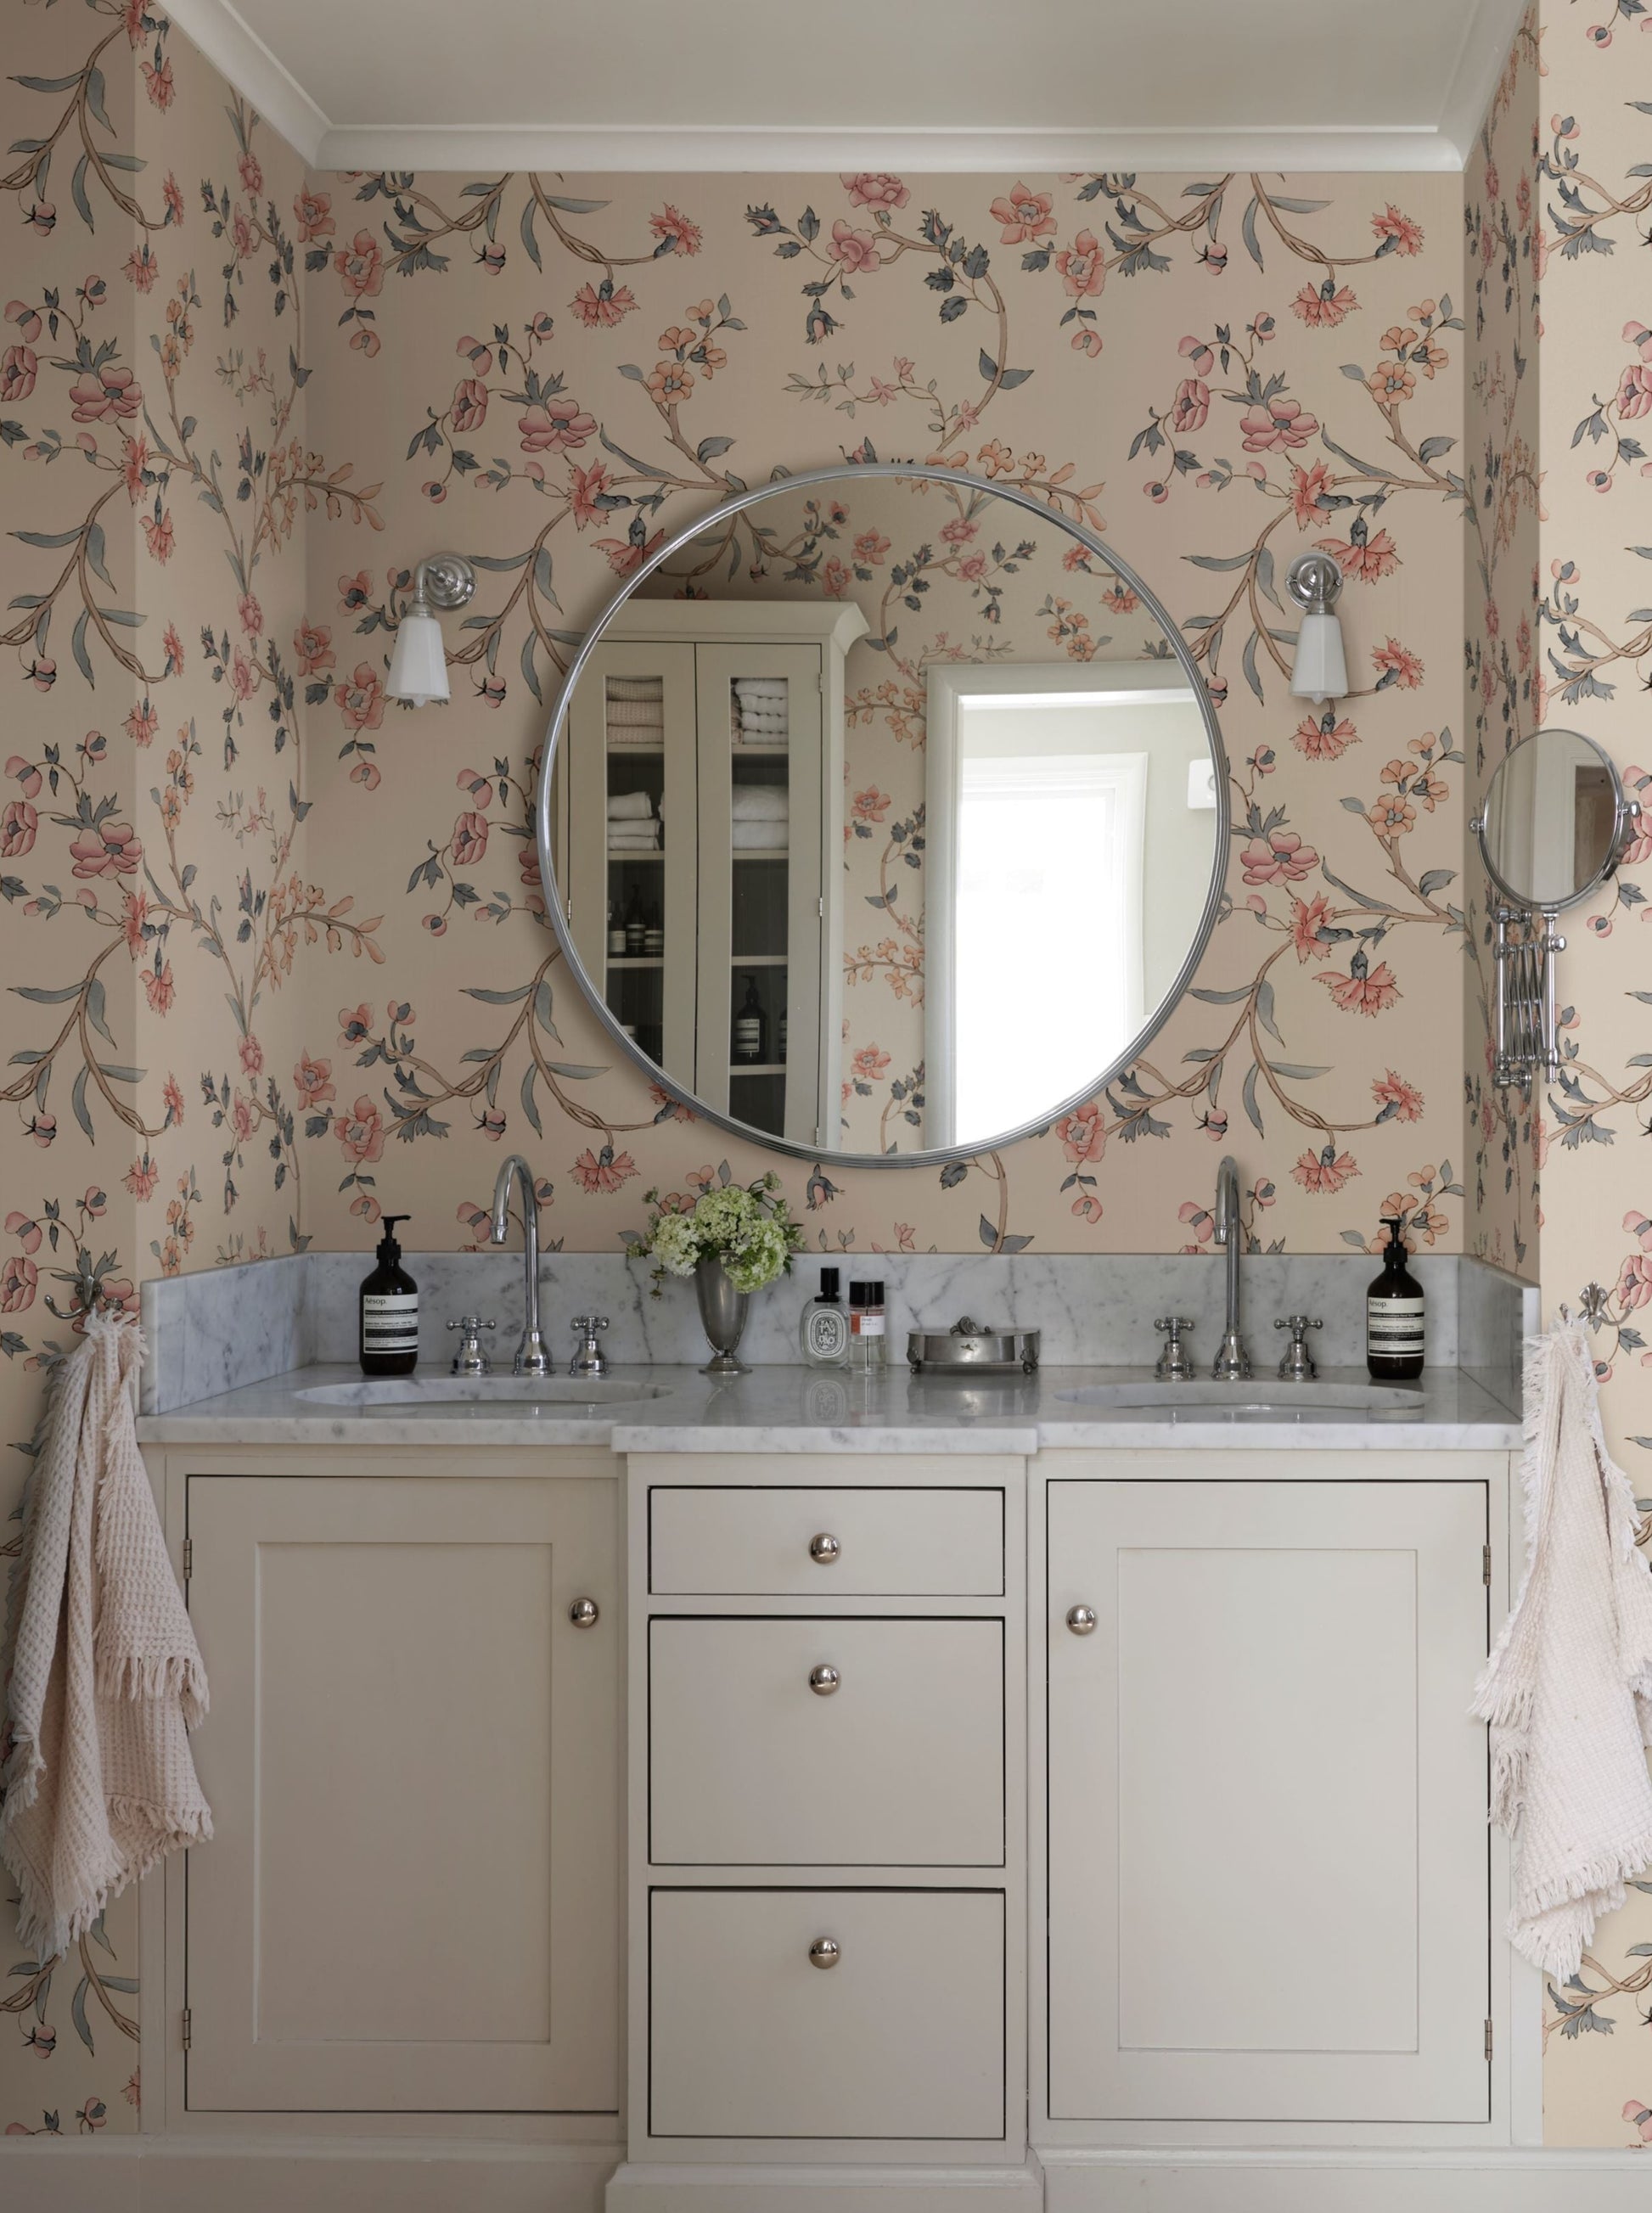 A romantic floral pattern from the 19th century with a pleasing hand-painted expression in harmonious colors. Soft wallpaper in its appearance and with a vintage feel. 